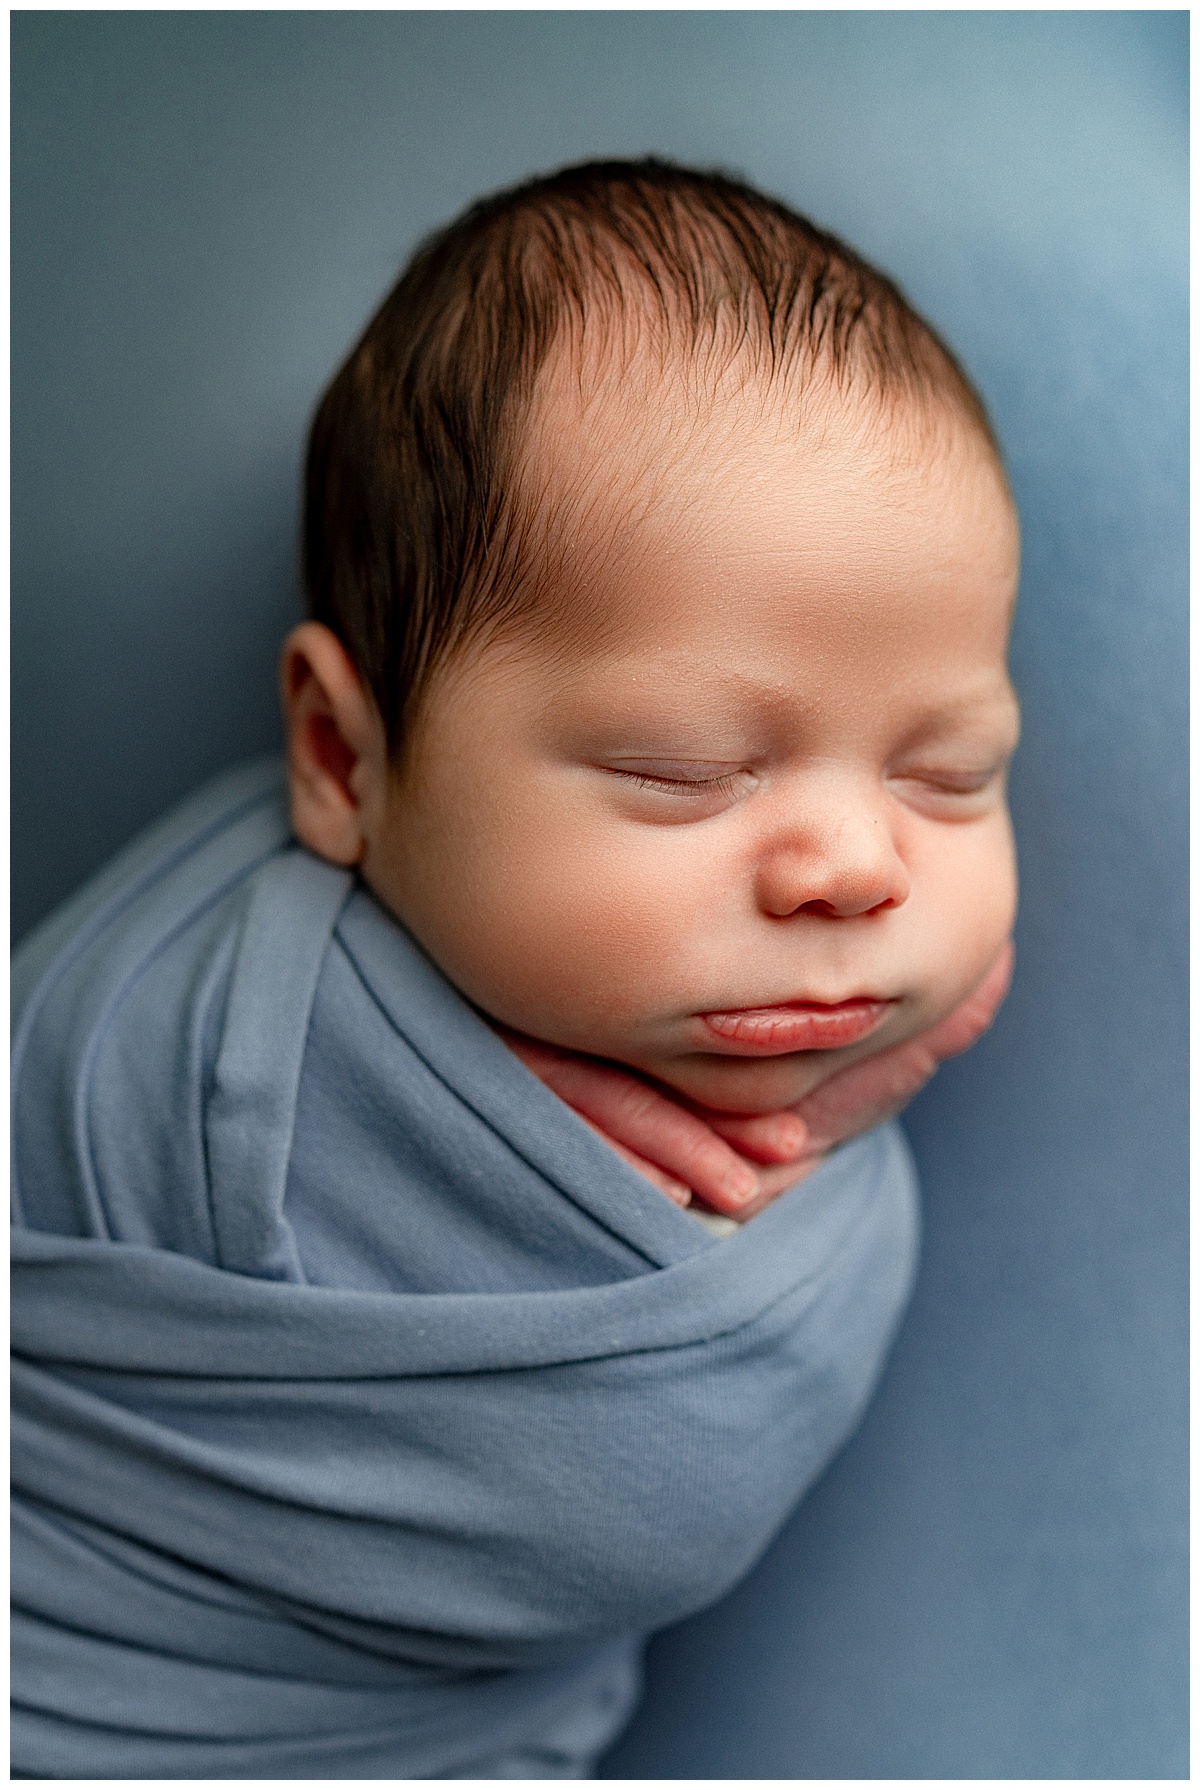 Baby is wrapped tightly for Virginia Newborn Photographer